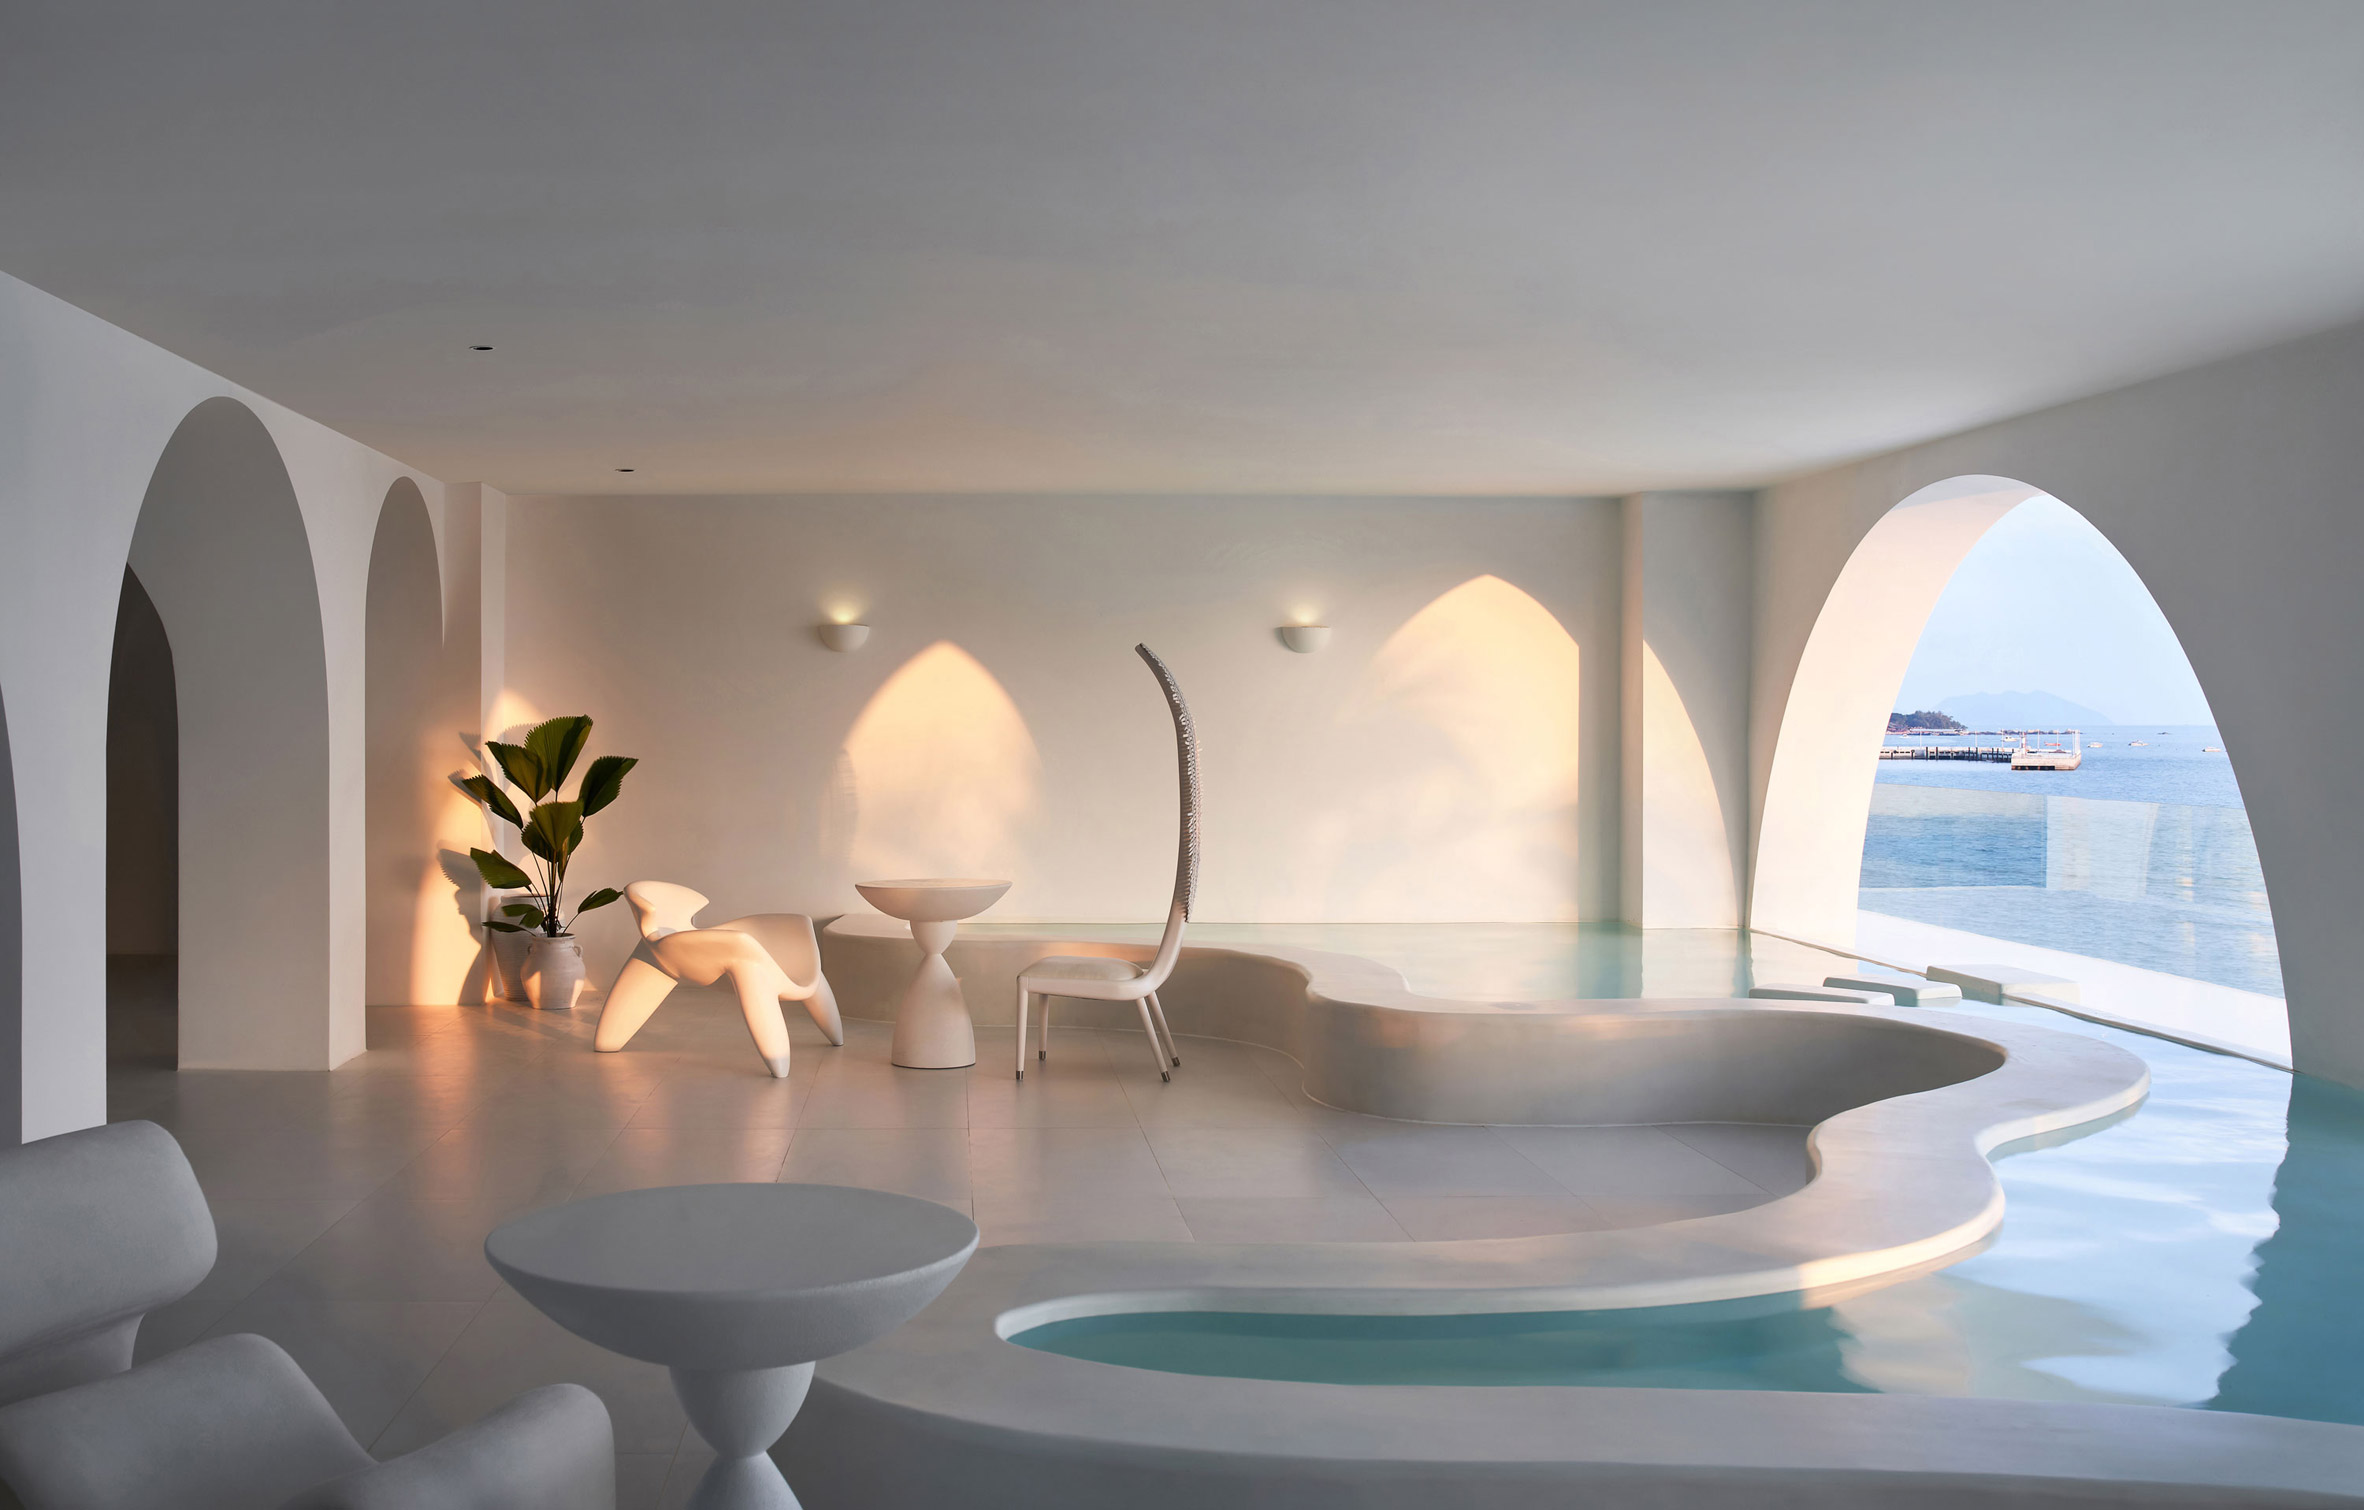 Hote lounge by GS Design with curvy-edged pool and white furniture